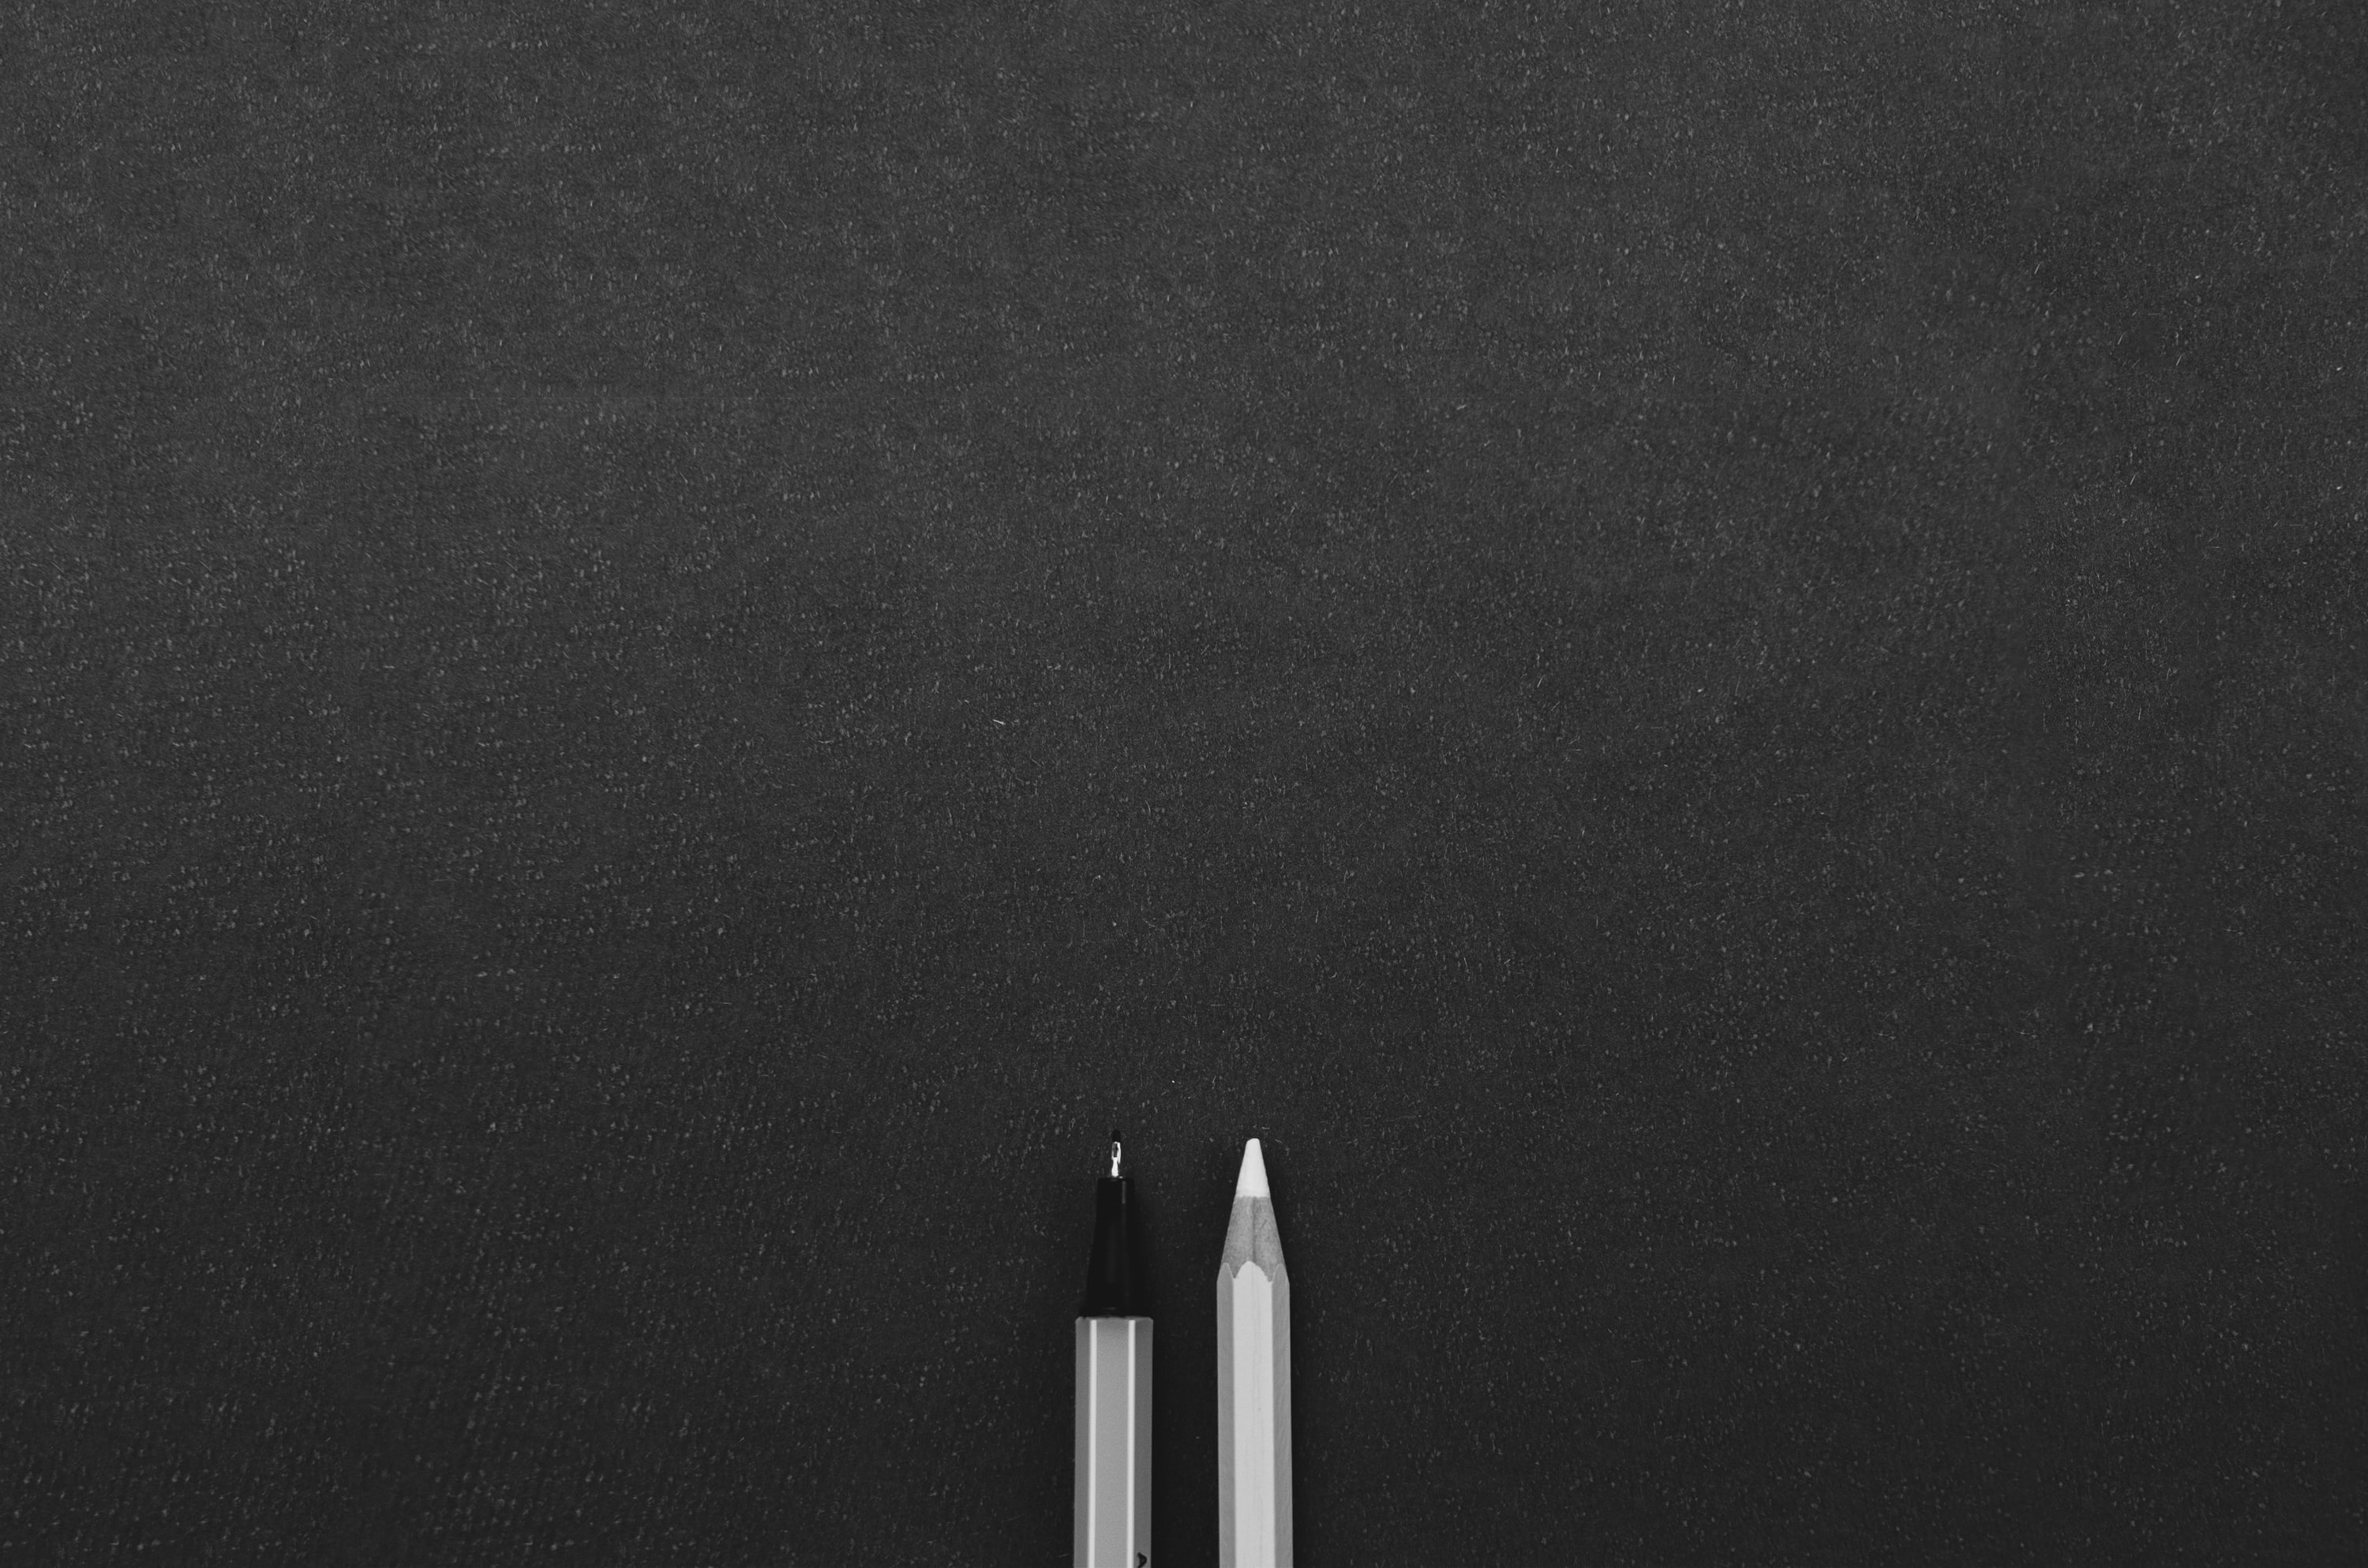 Two pencils on a black background